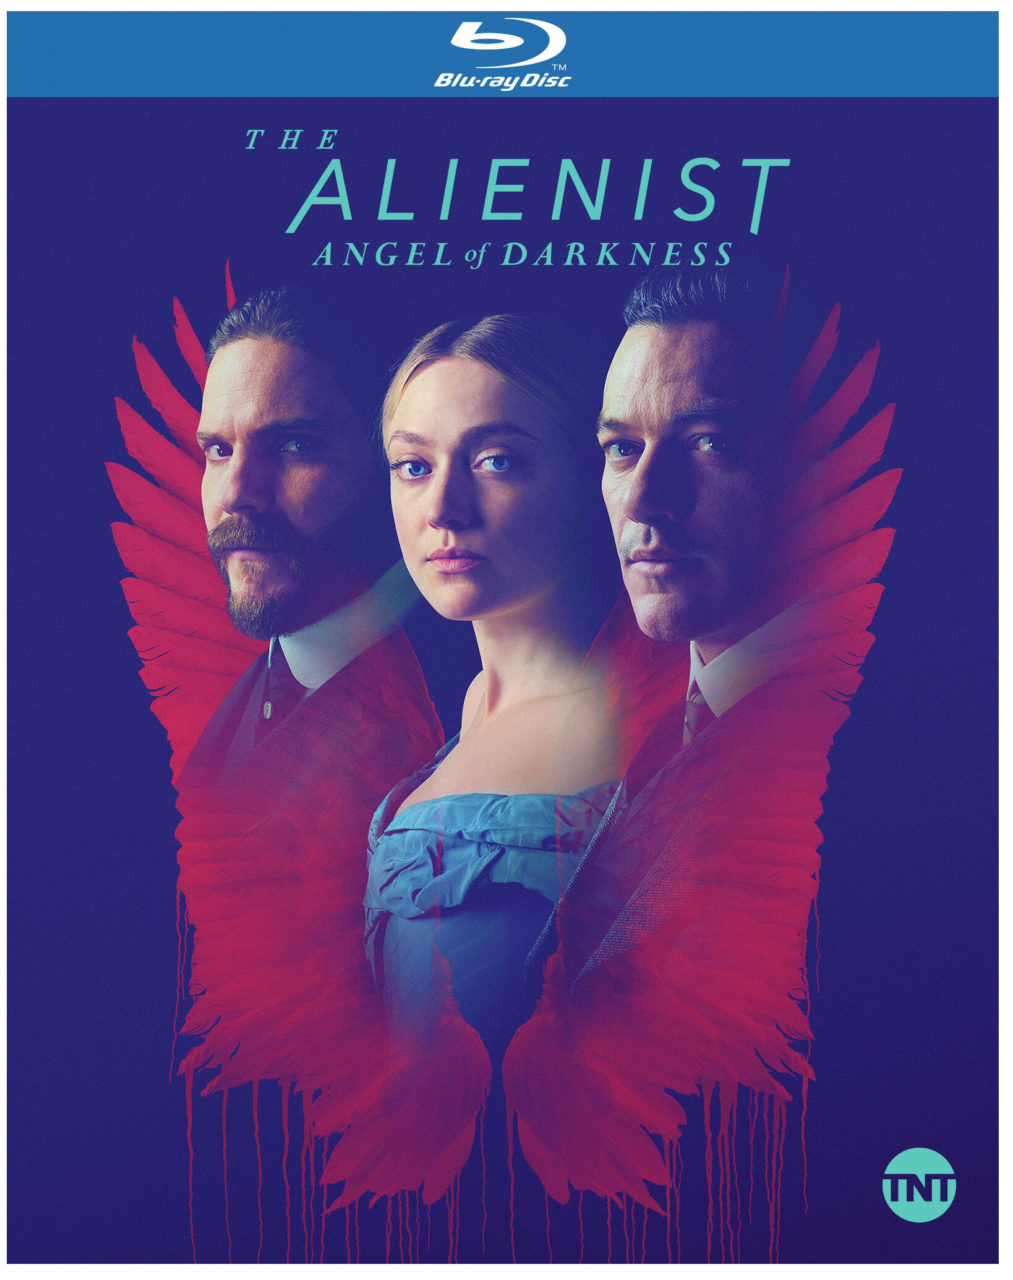 The Alienist: Angel Of Darkness A Limited Series Blu-Ray cover (Warner Bros. Home Entertainment)